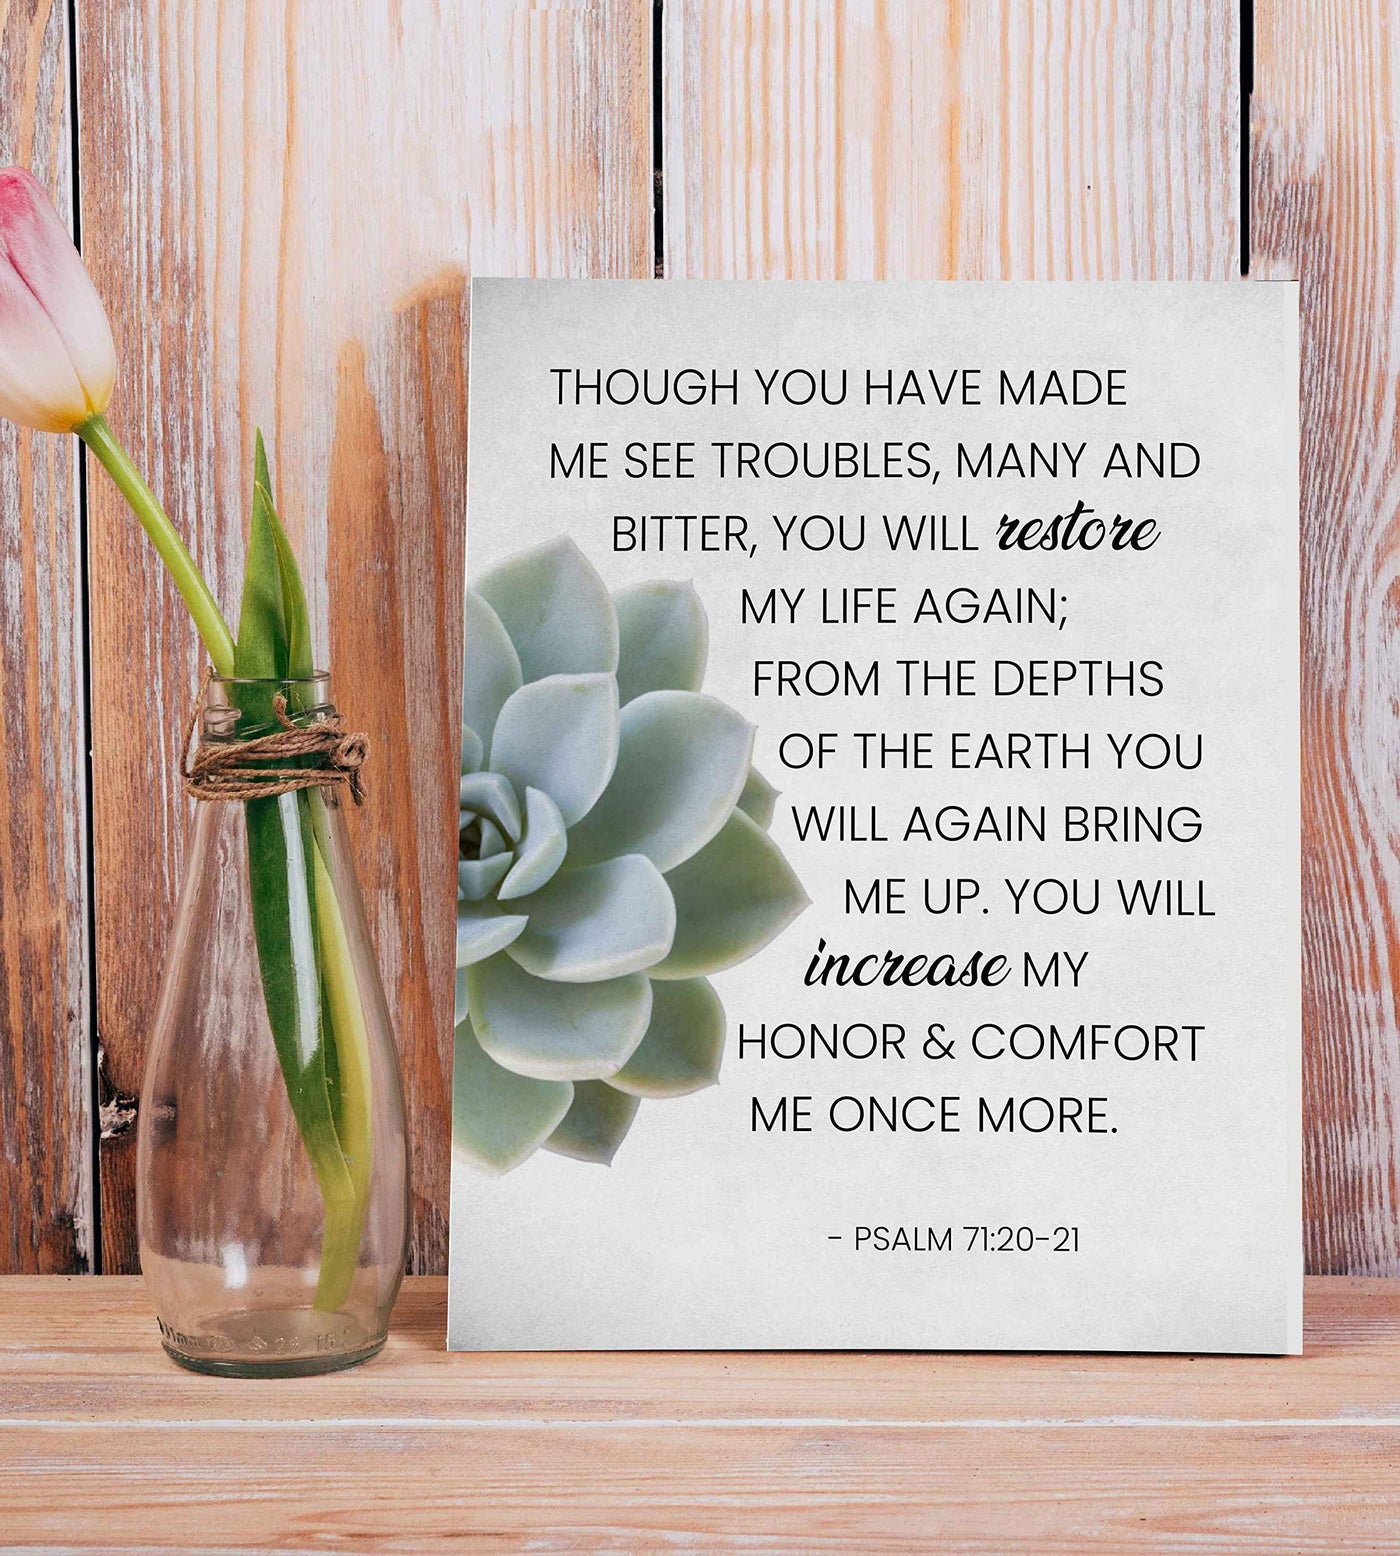 You Will Comfort Me Once More-Psalm 71:20-21-Bible Verse Wall Art -8 x 10" Floral Typographic Christian Print-Ready to Frame. Inspirational Scripture Print for Home-Office-Church Decor. Have Faith!